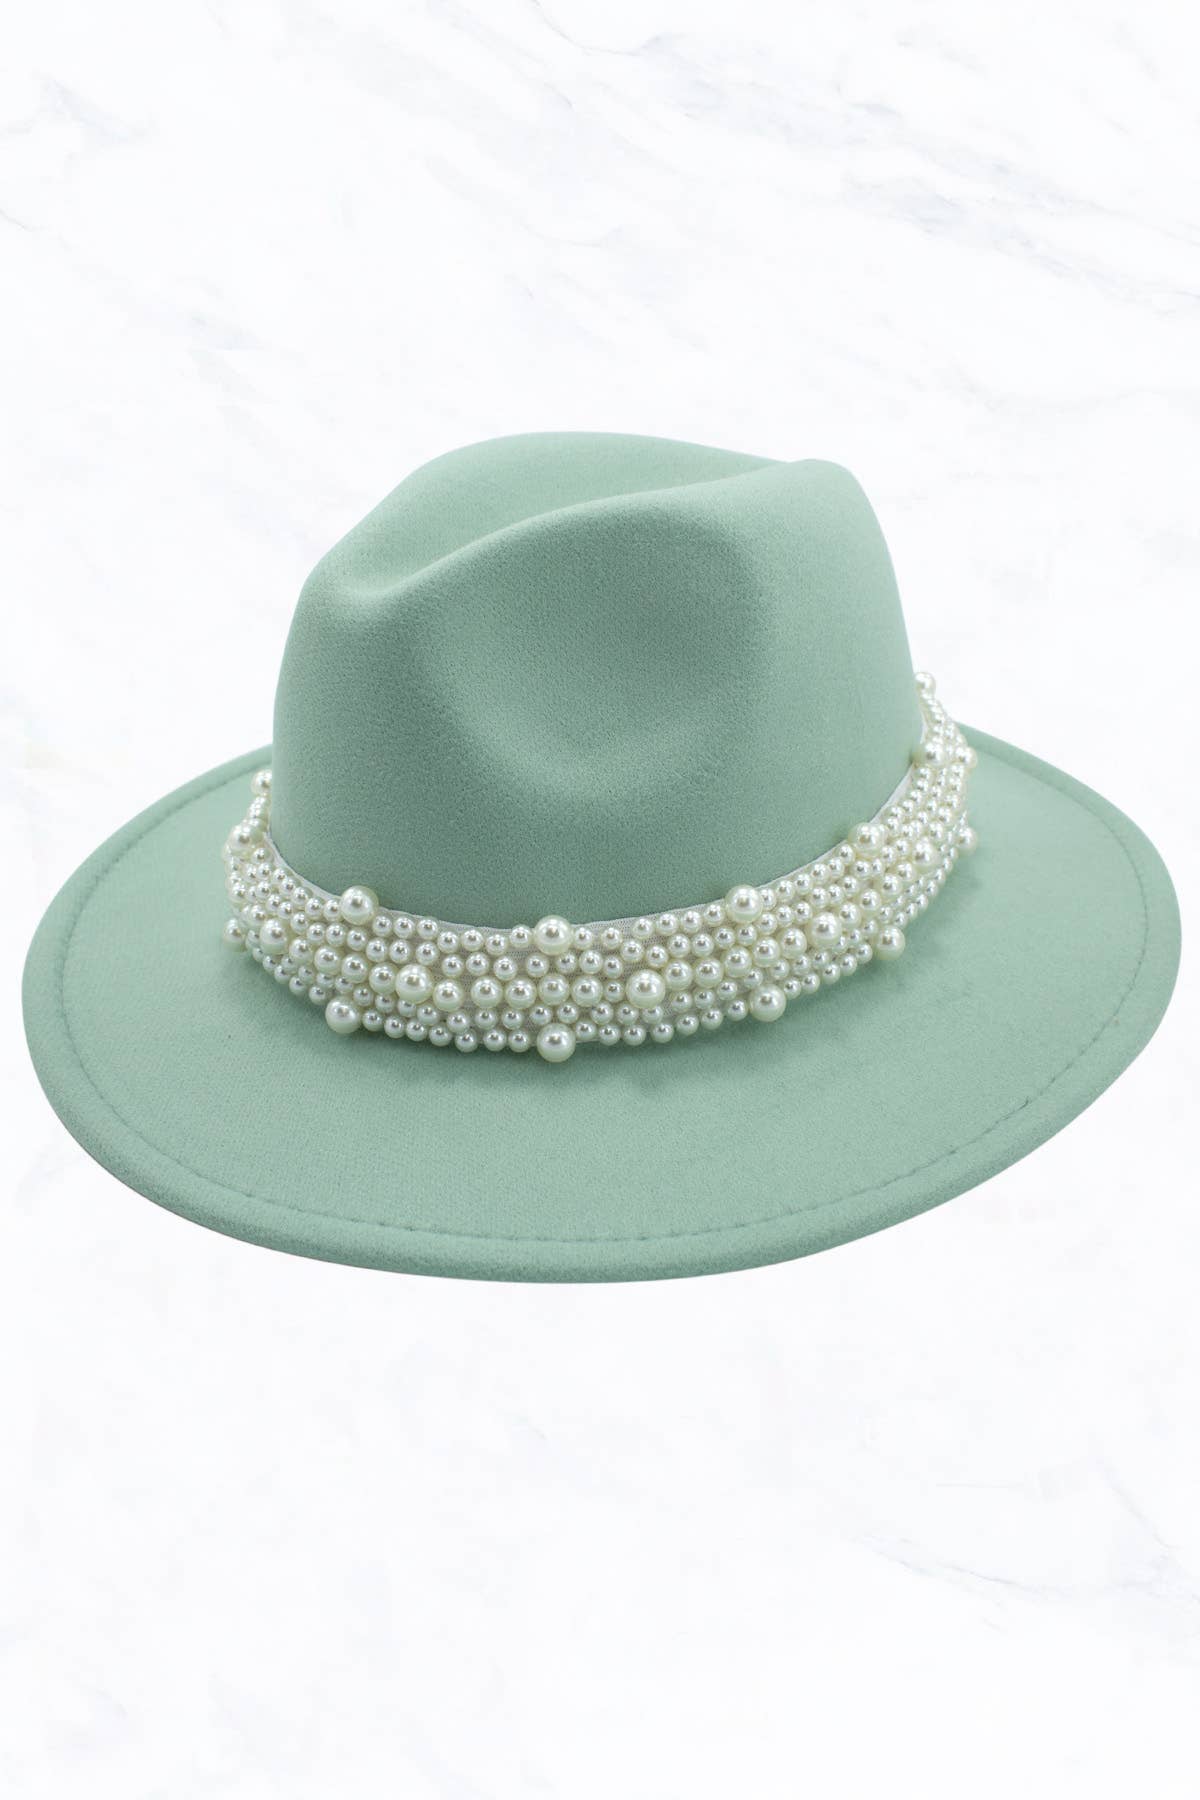 New Style Fashion Fedora Jazz Hat with Wide Pearl Belt